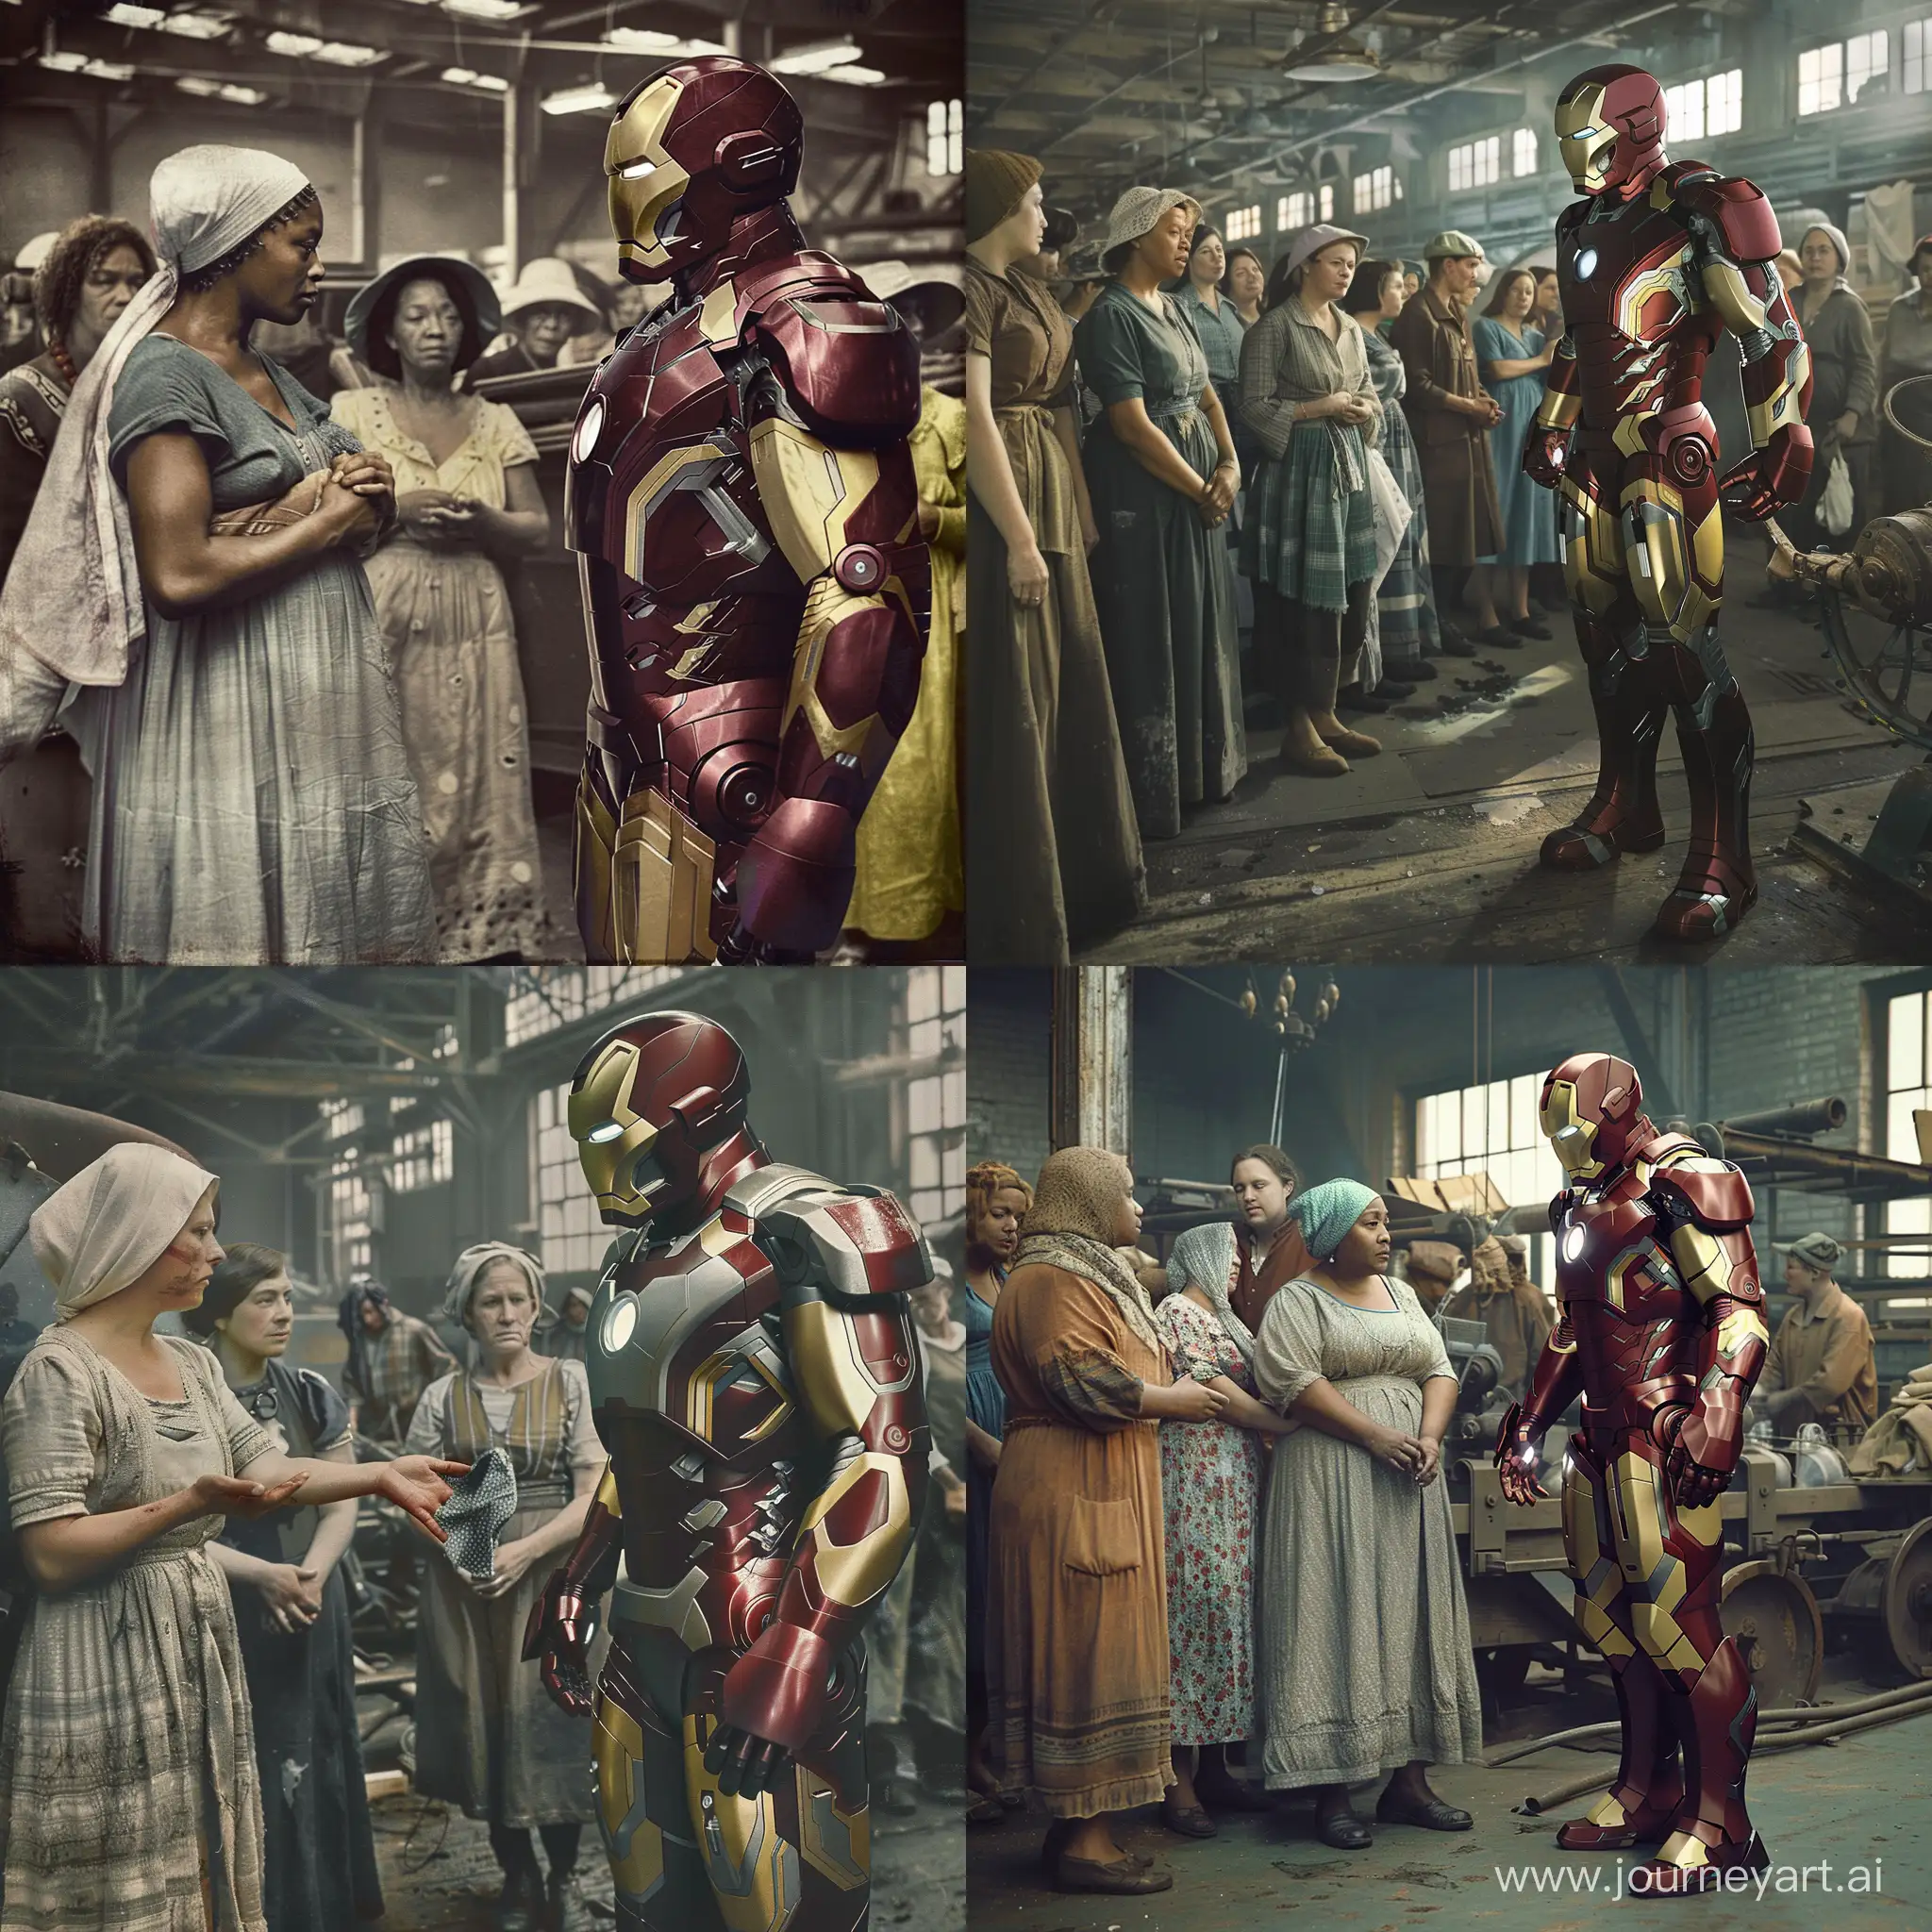 Iron-Man-Comforts-Female-Textile-Workers-at-Northwest-National-Cotton-Mill-No2